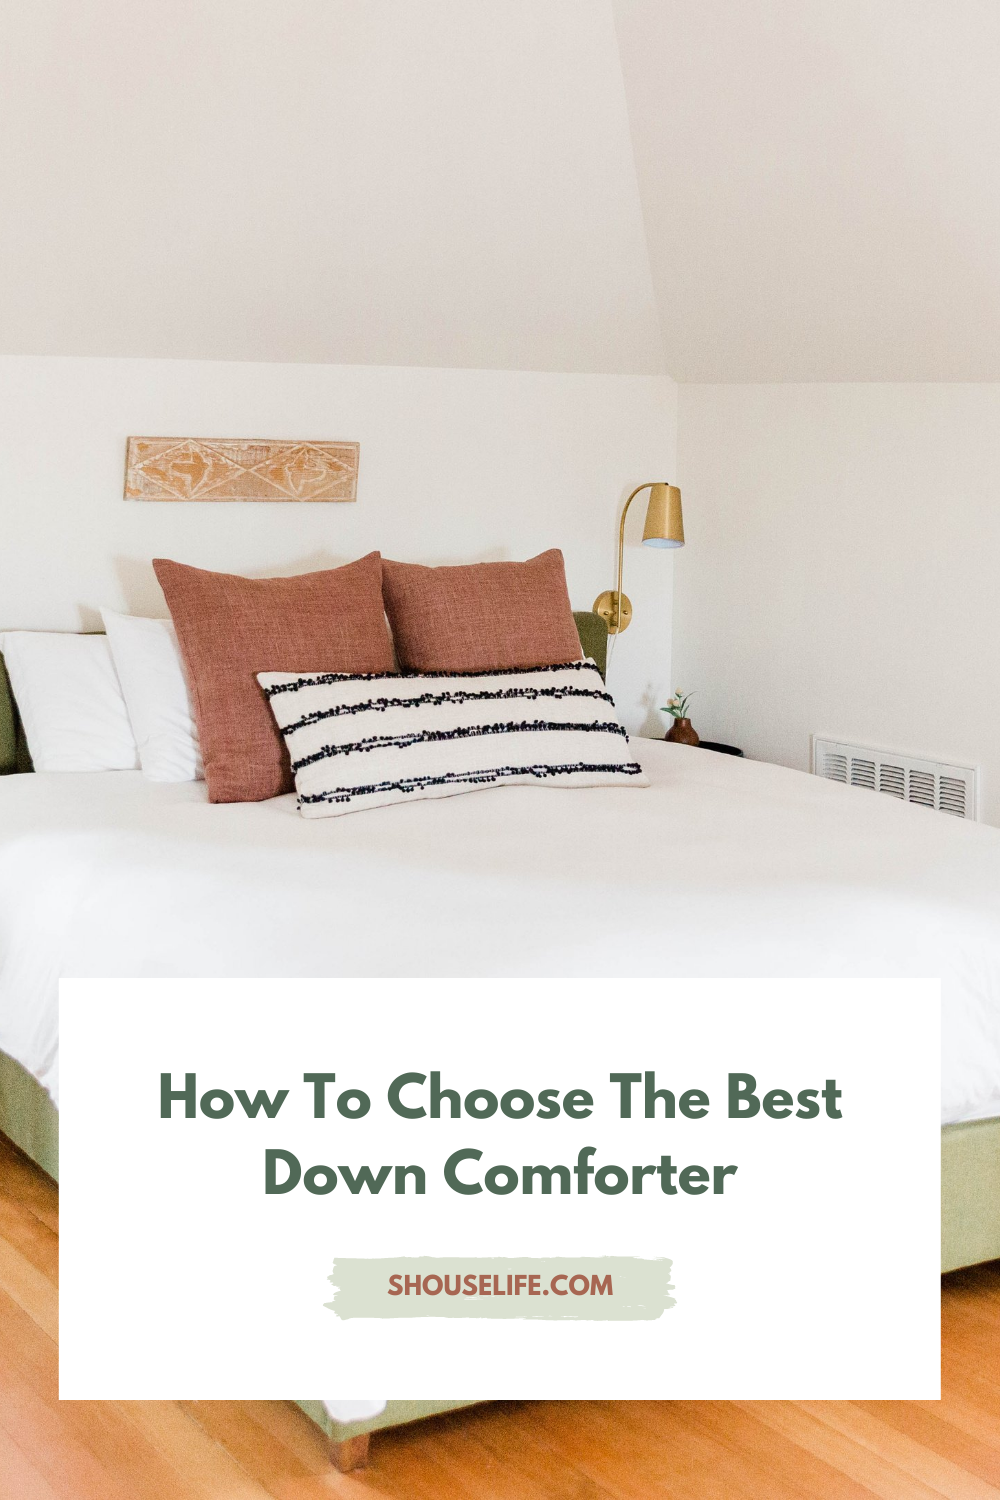 How To Choose The Best Down Comforter